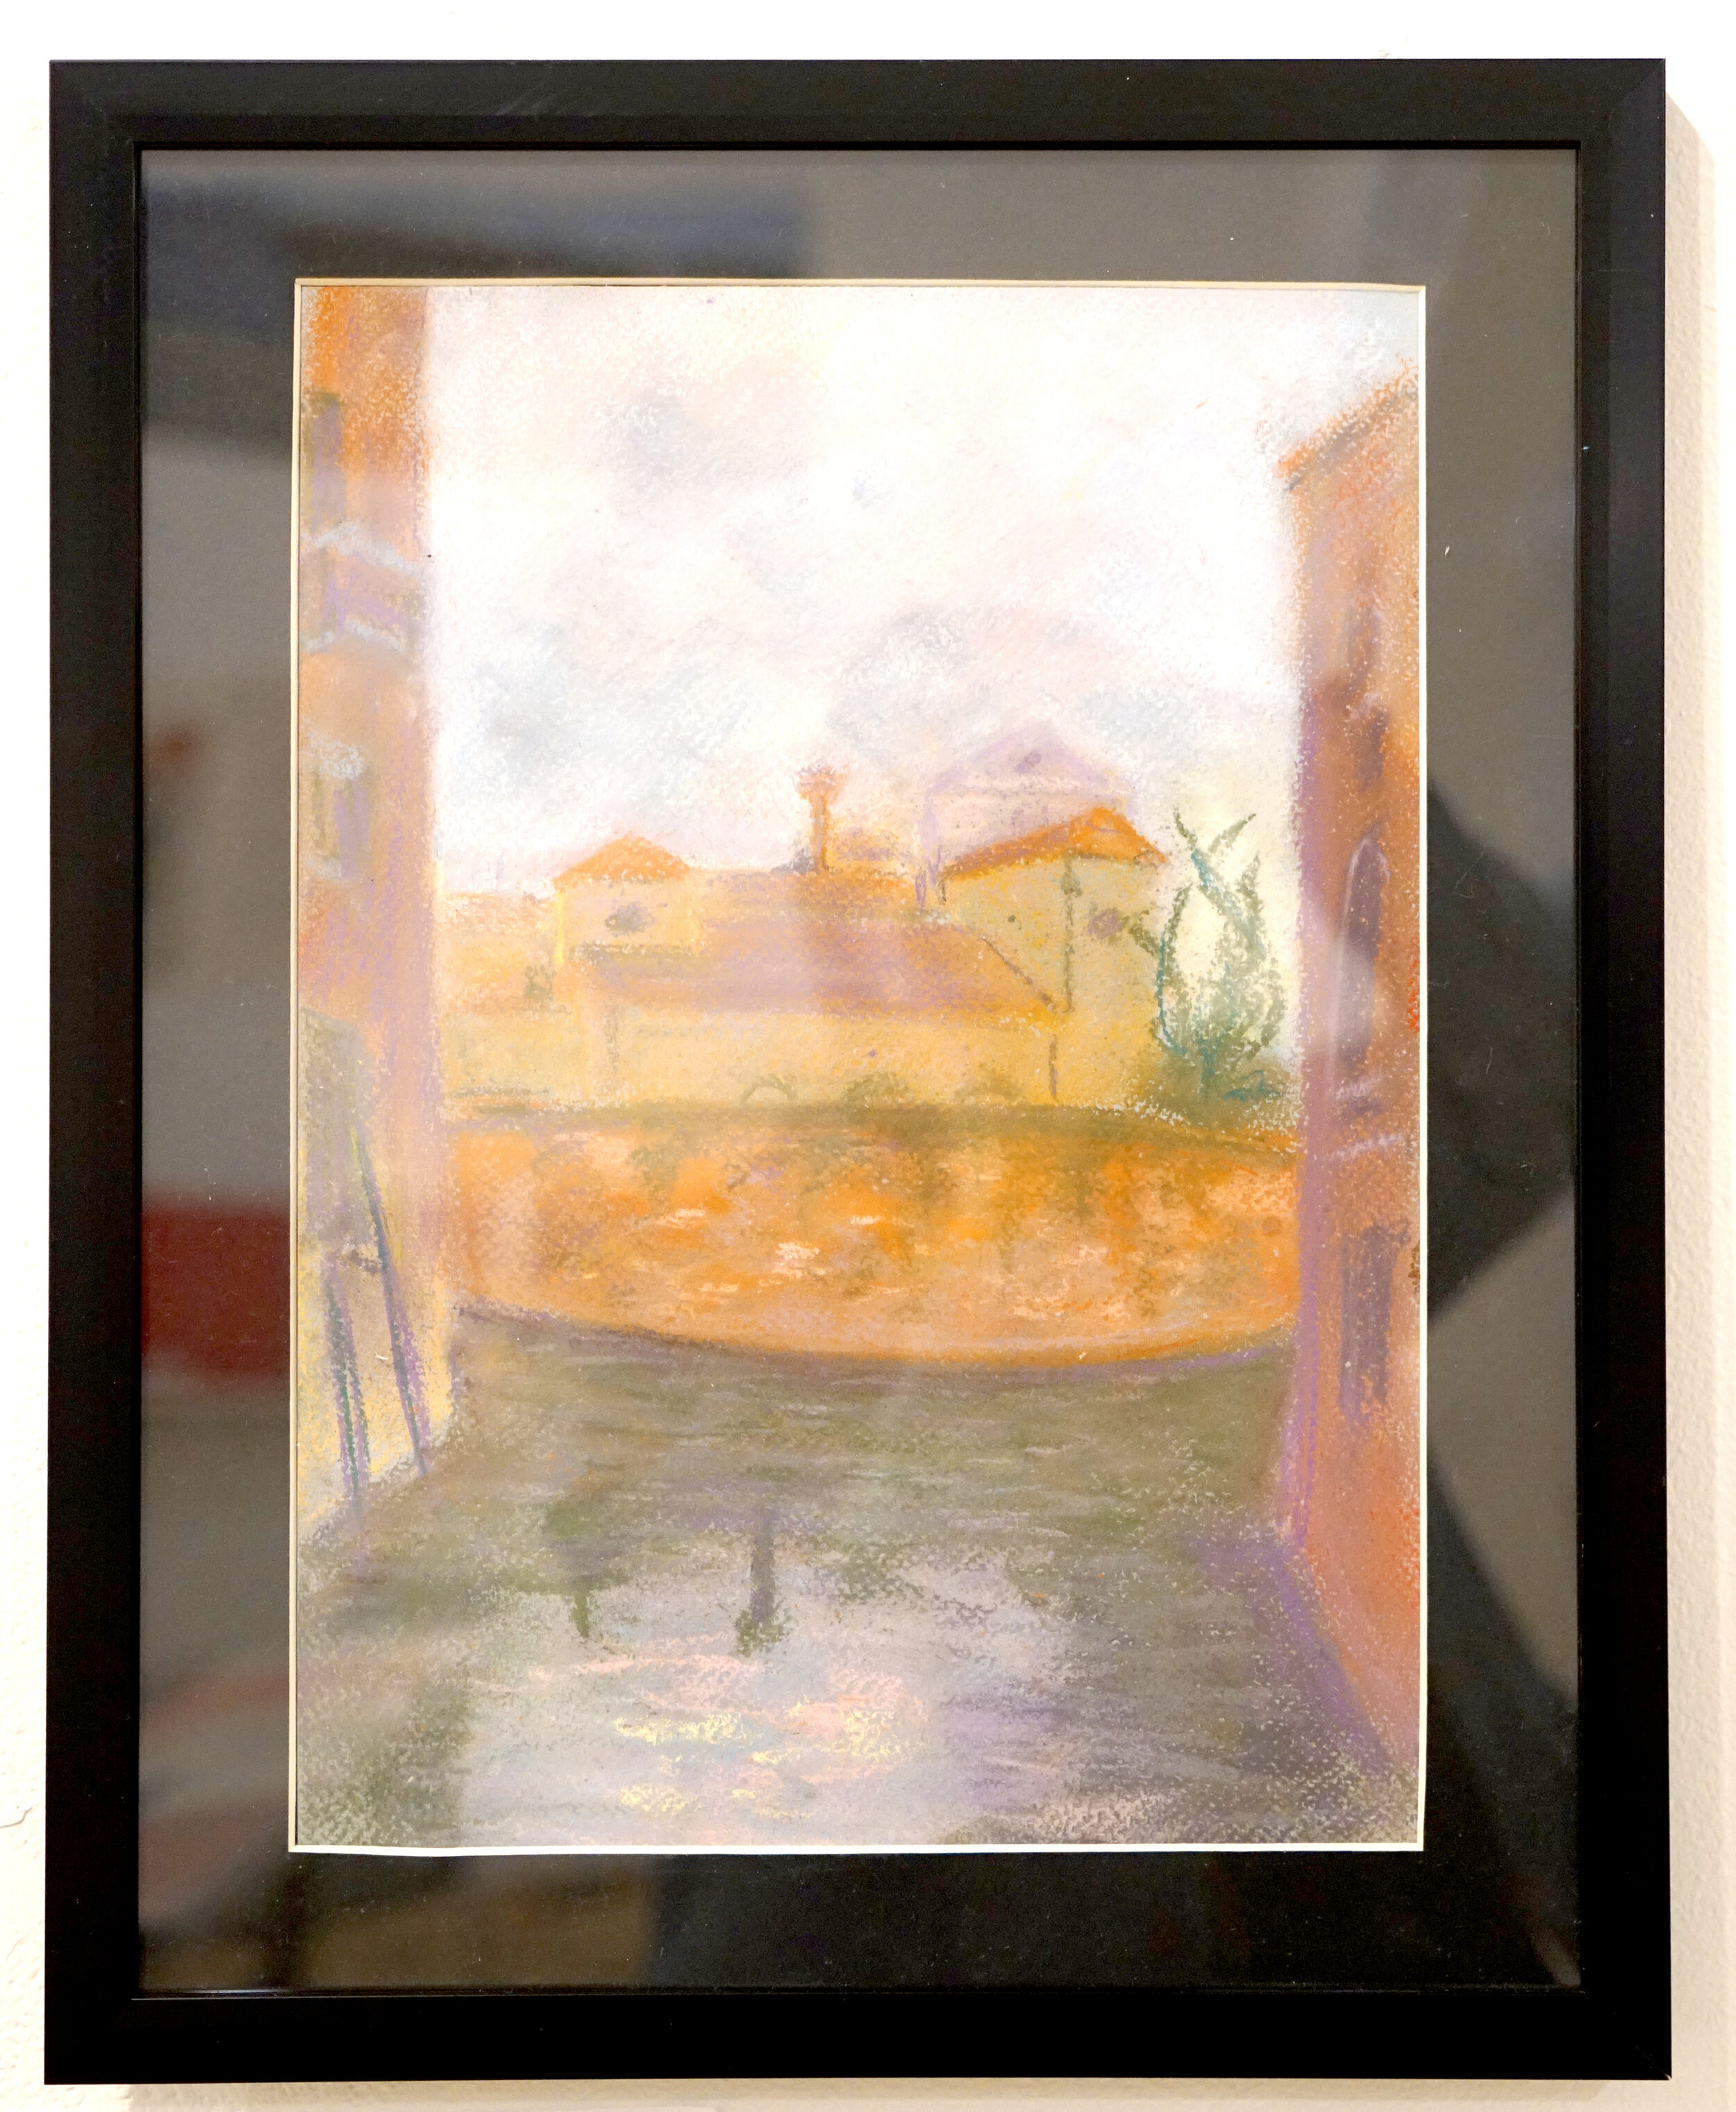  Sarah Szabo (PiV ‘13),  Venice Canal Turning , 2013. Pastel on paper, 9 x 12 in. 